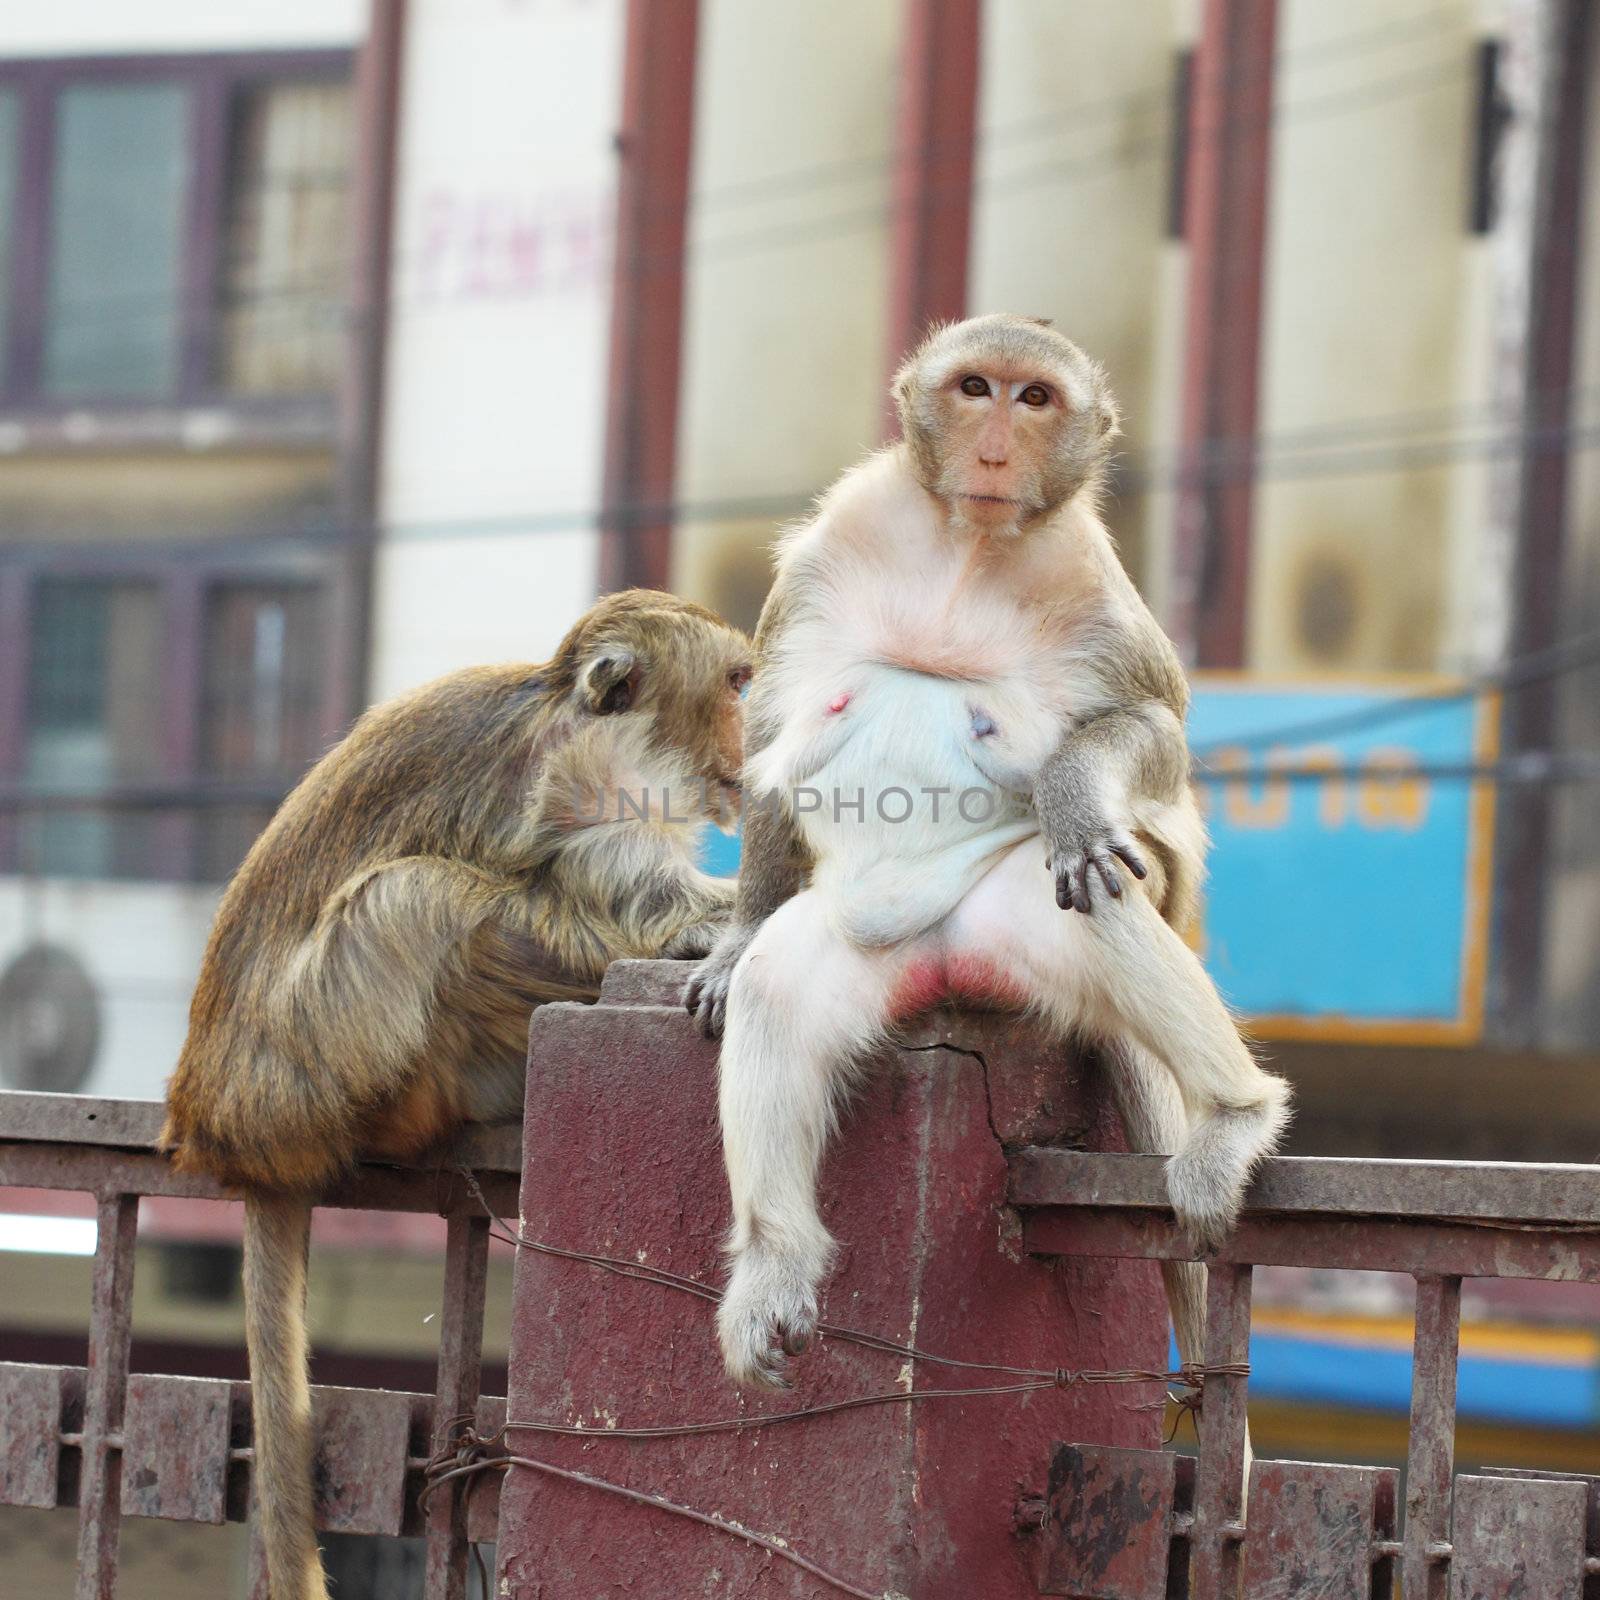 female monkey sitting on fence in the city